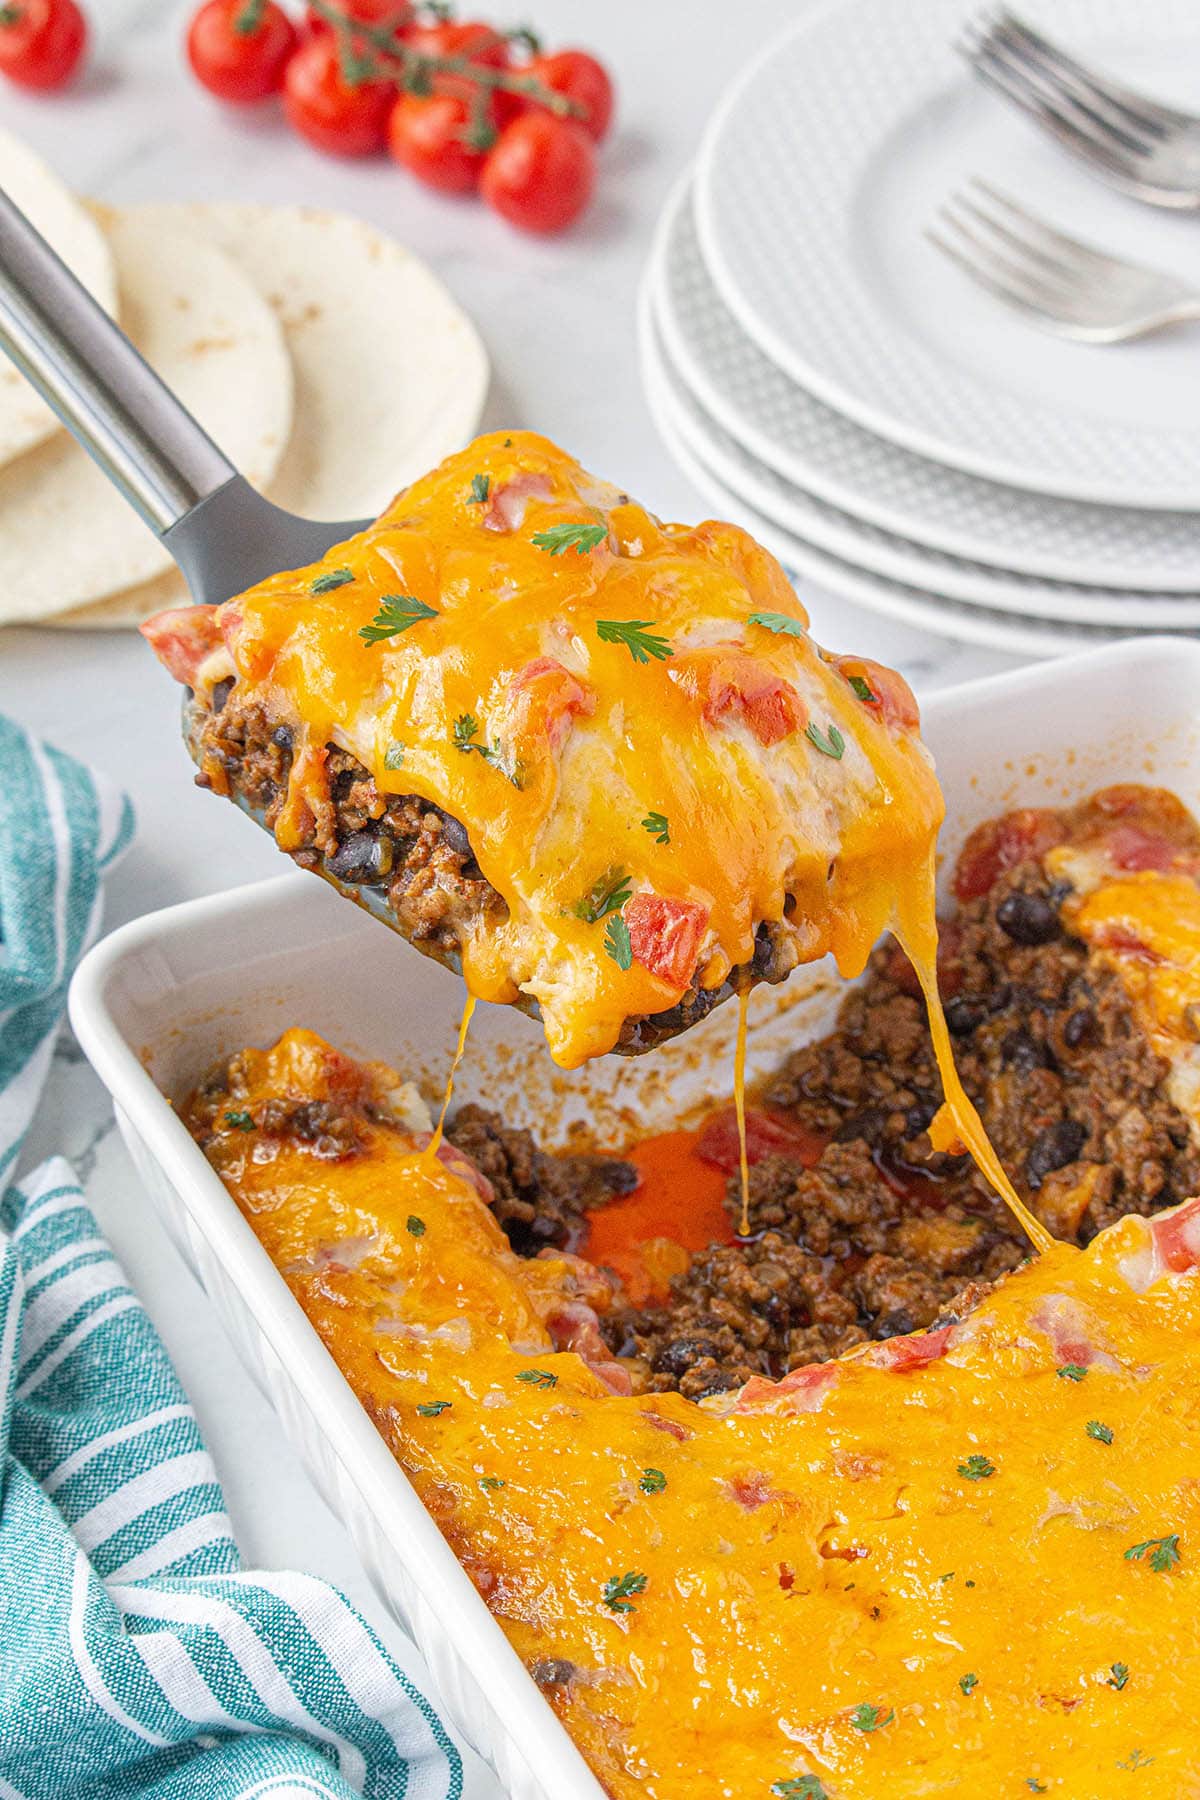 Cheesy Firecracker Casserole in baking dish with serving spatula taking out a serving.